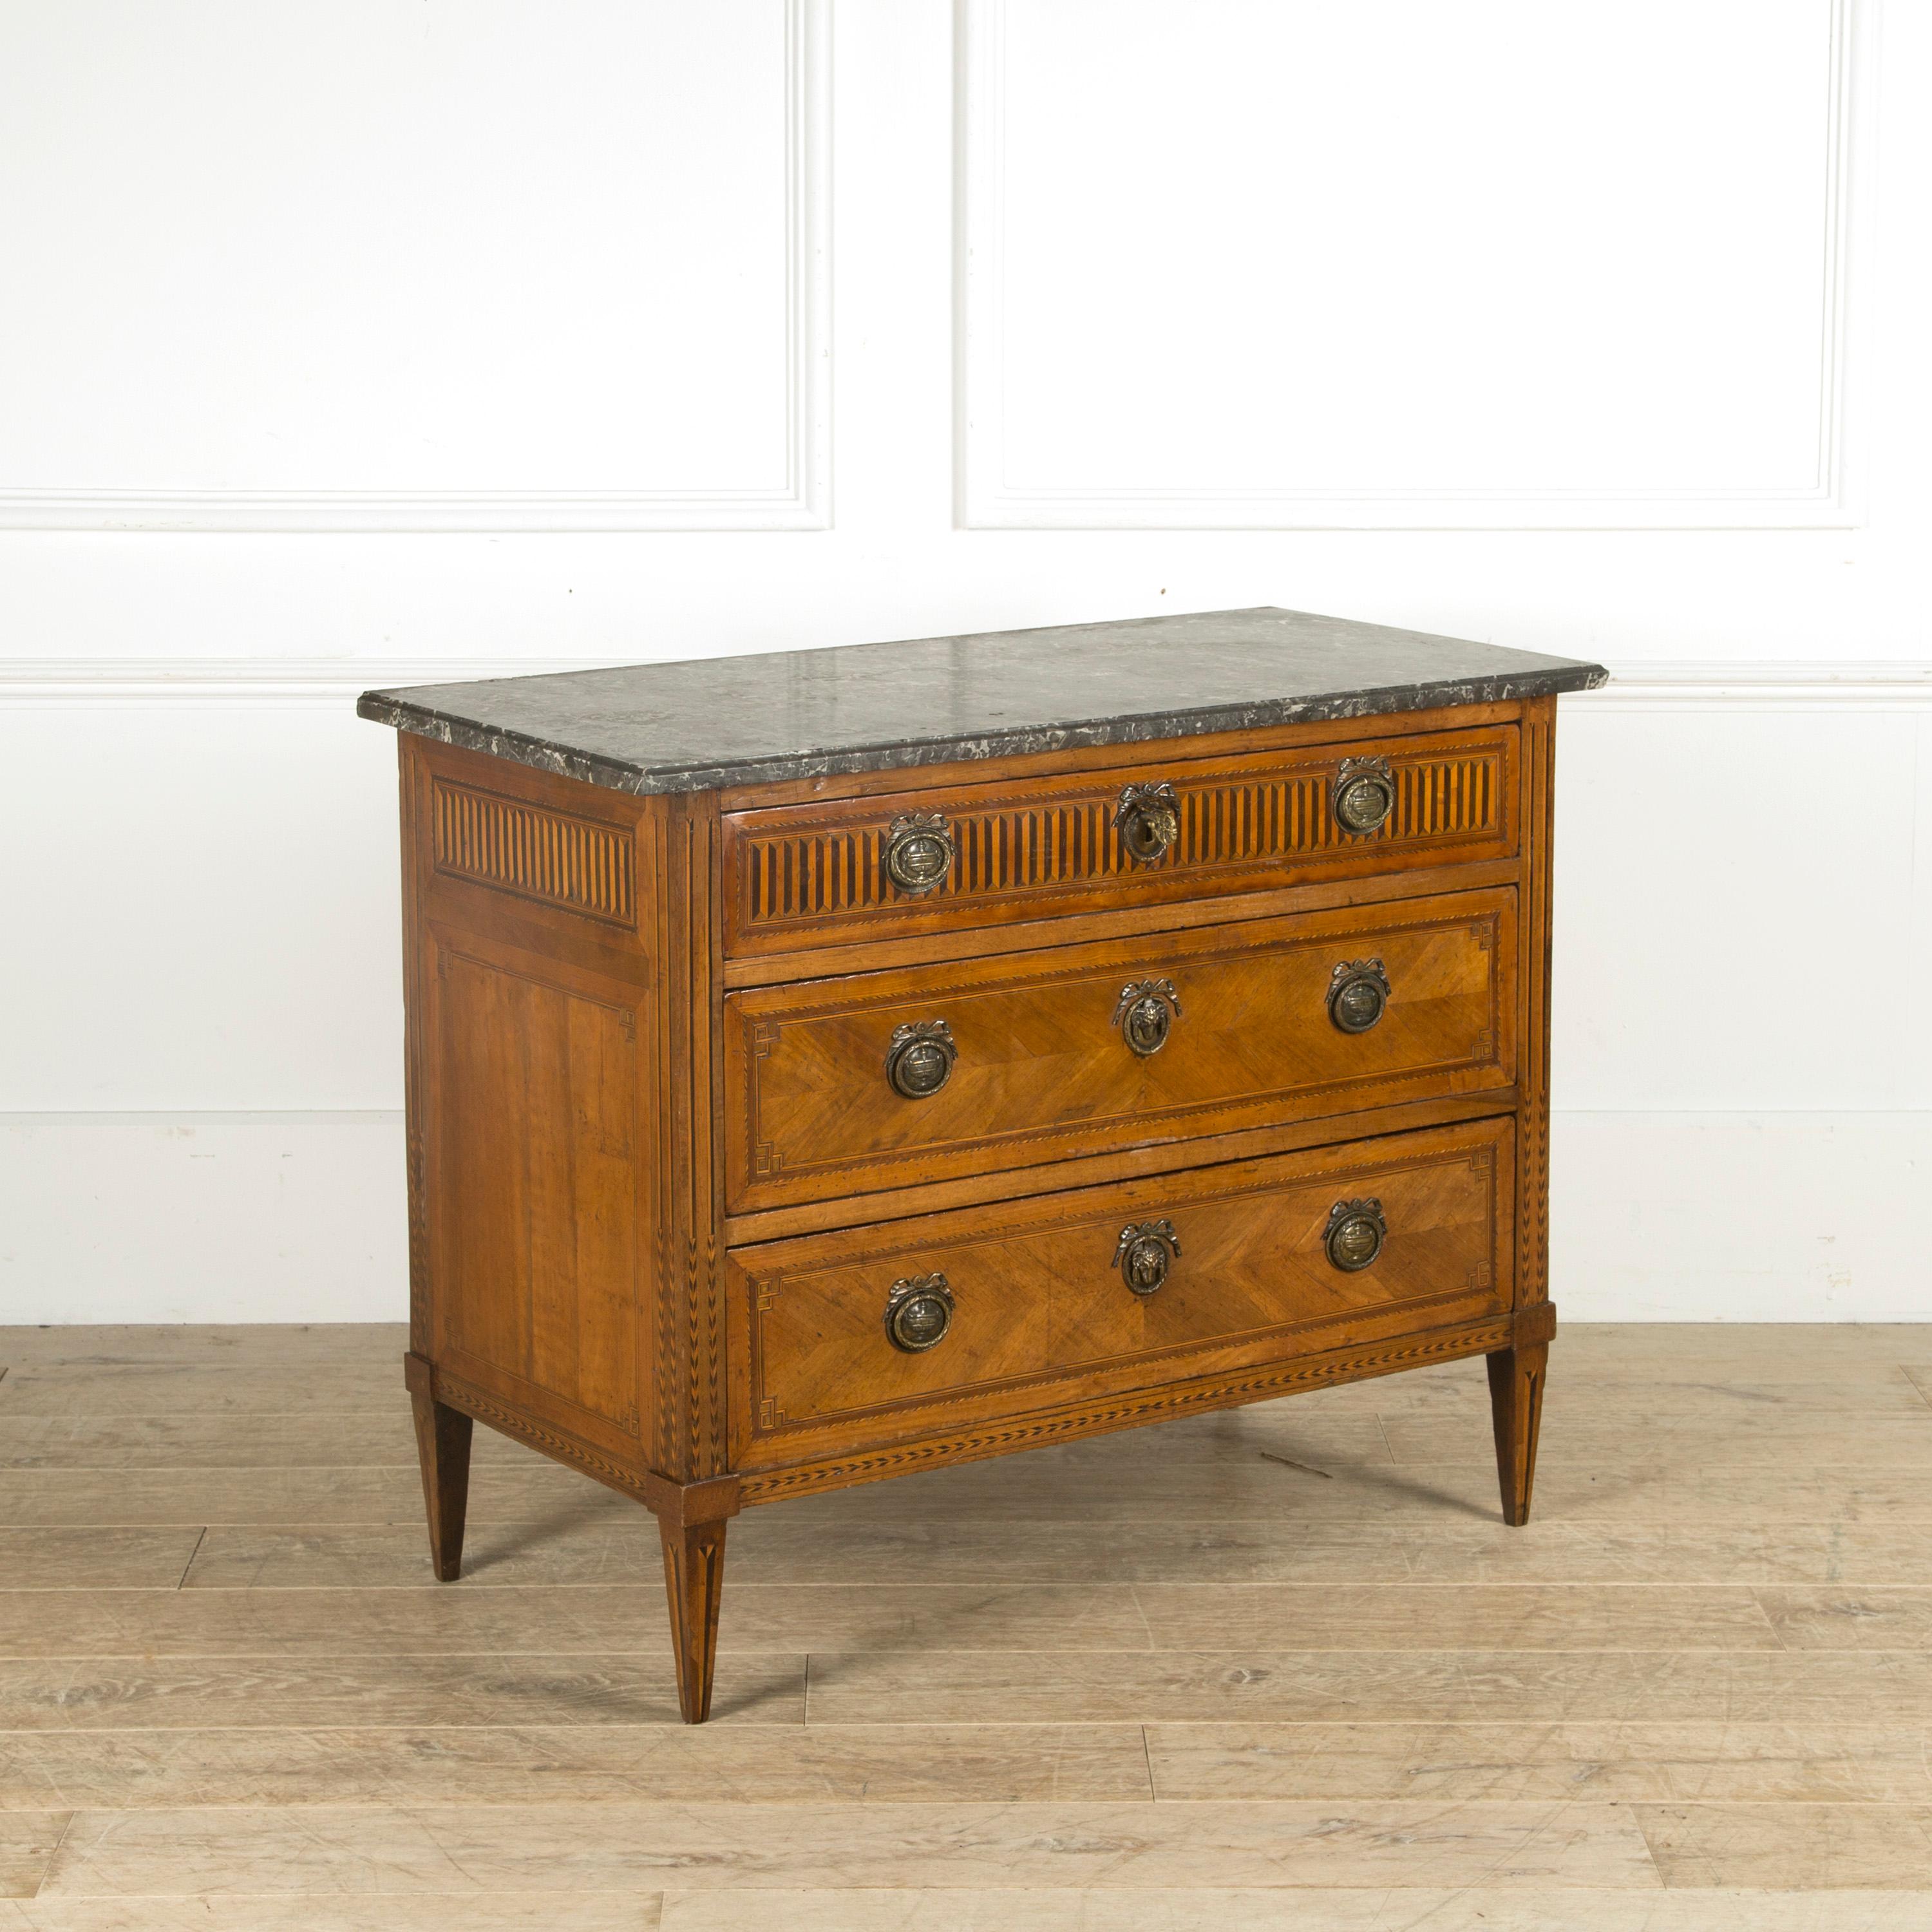 Period Louis XVI walnut commode, with three lockable drawers. Stunning decorative marquetry including tulipwood, pearwood, rosewood and acacia. Fabulous brass handles and lock surrounds with rams head covers. Original Bardiglio Carrara marble top,